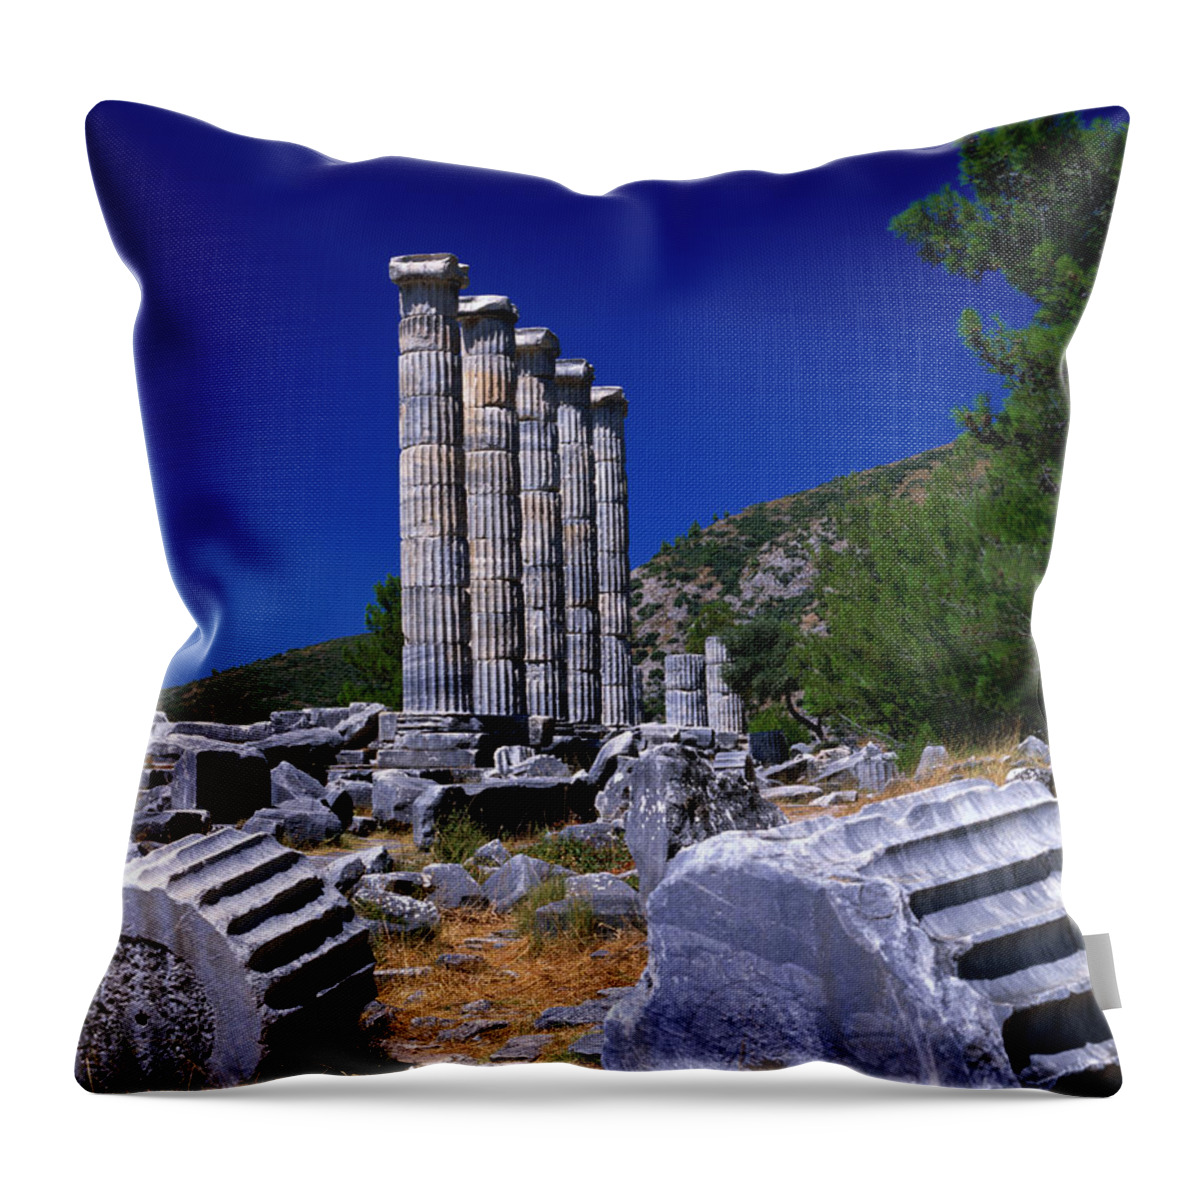 Aging Process Throw Pillow featuring the photograph Columns At The Ancient Ionian Ruins Of by Izzet Keribar